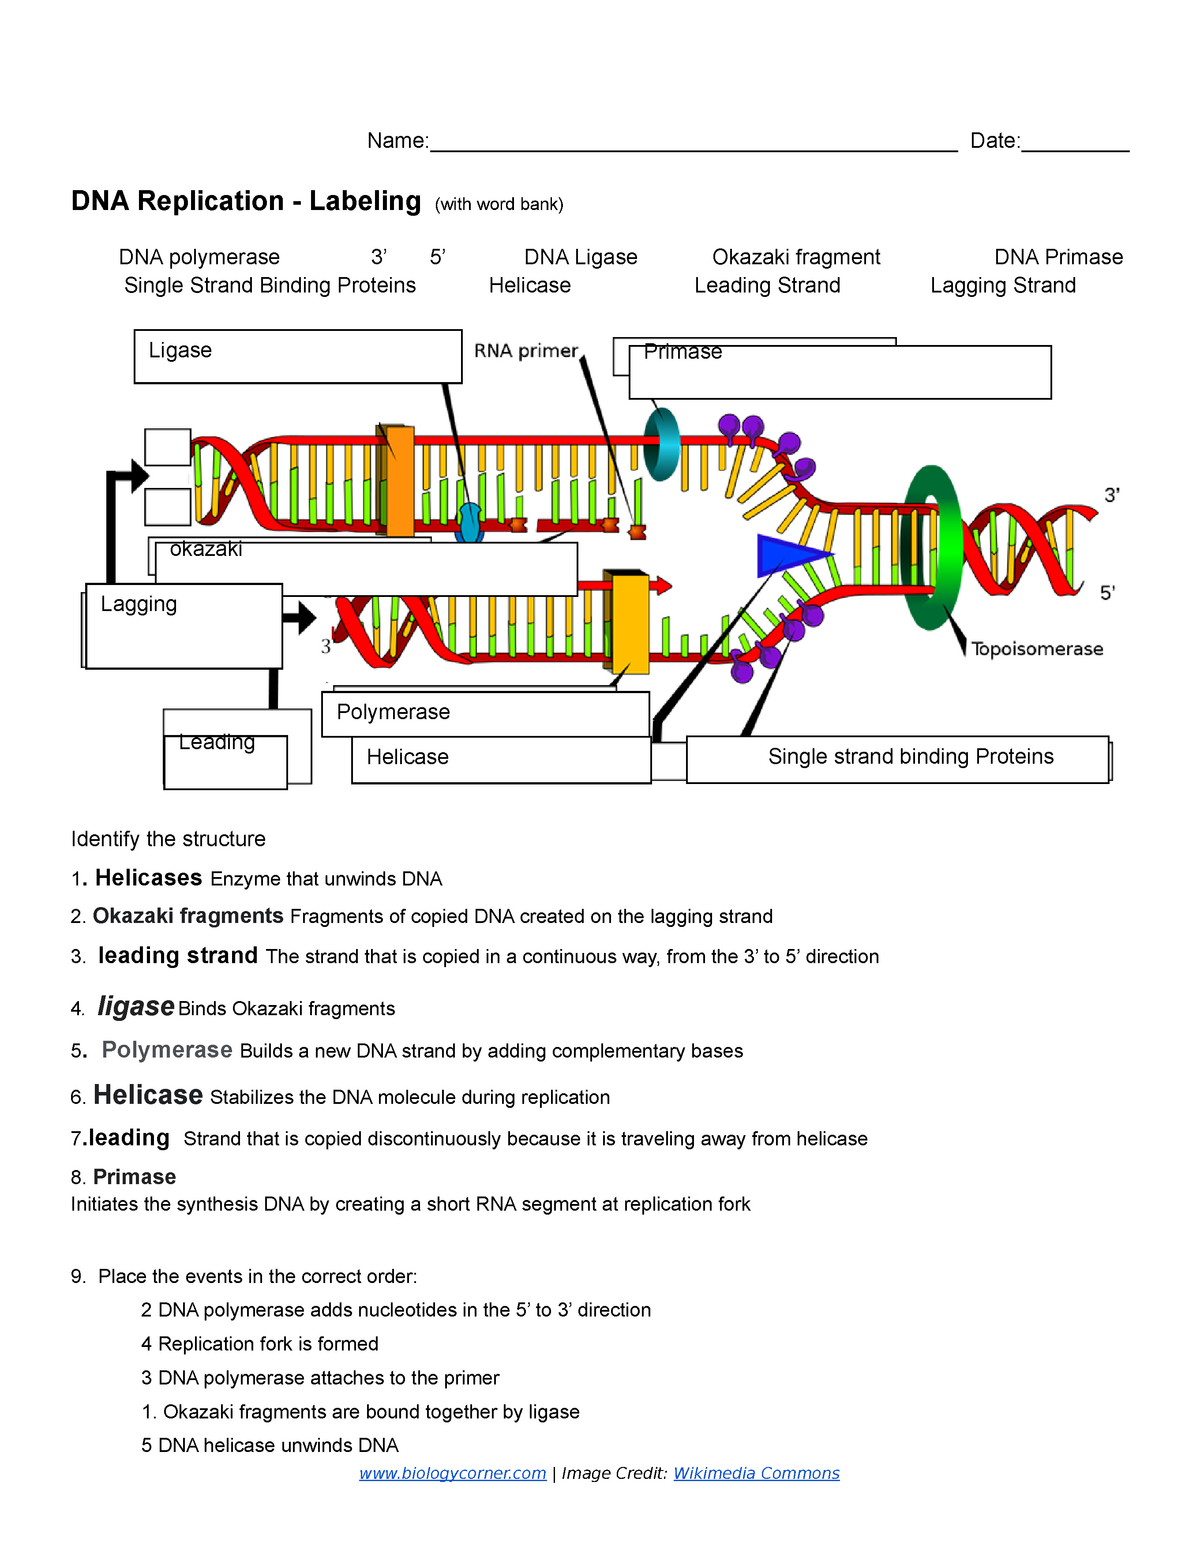 Copy of DNA Replication - Labeling 21 - Name: - StuDocu Intended For Dna Replication Worksheet Key